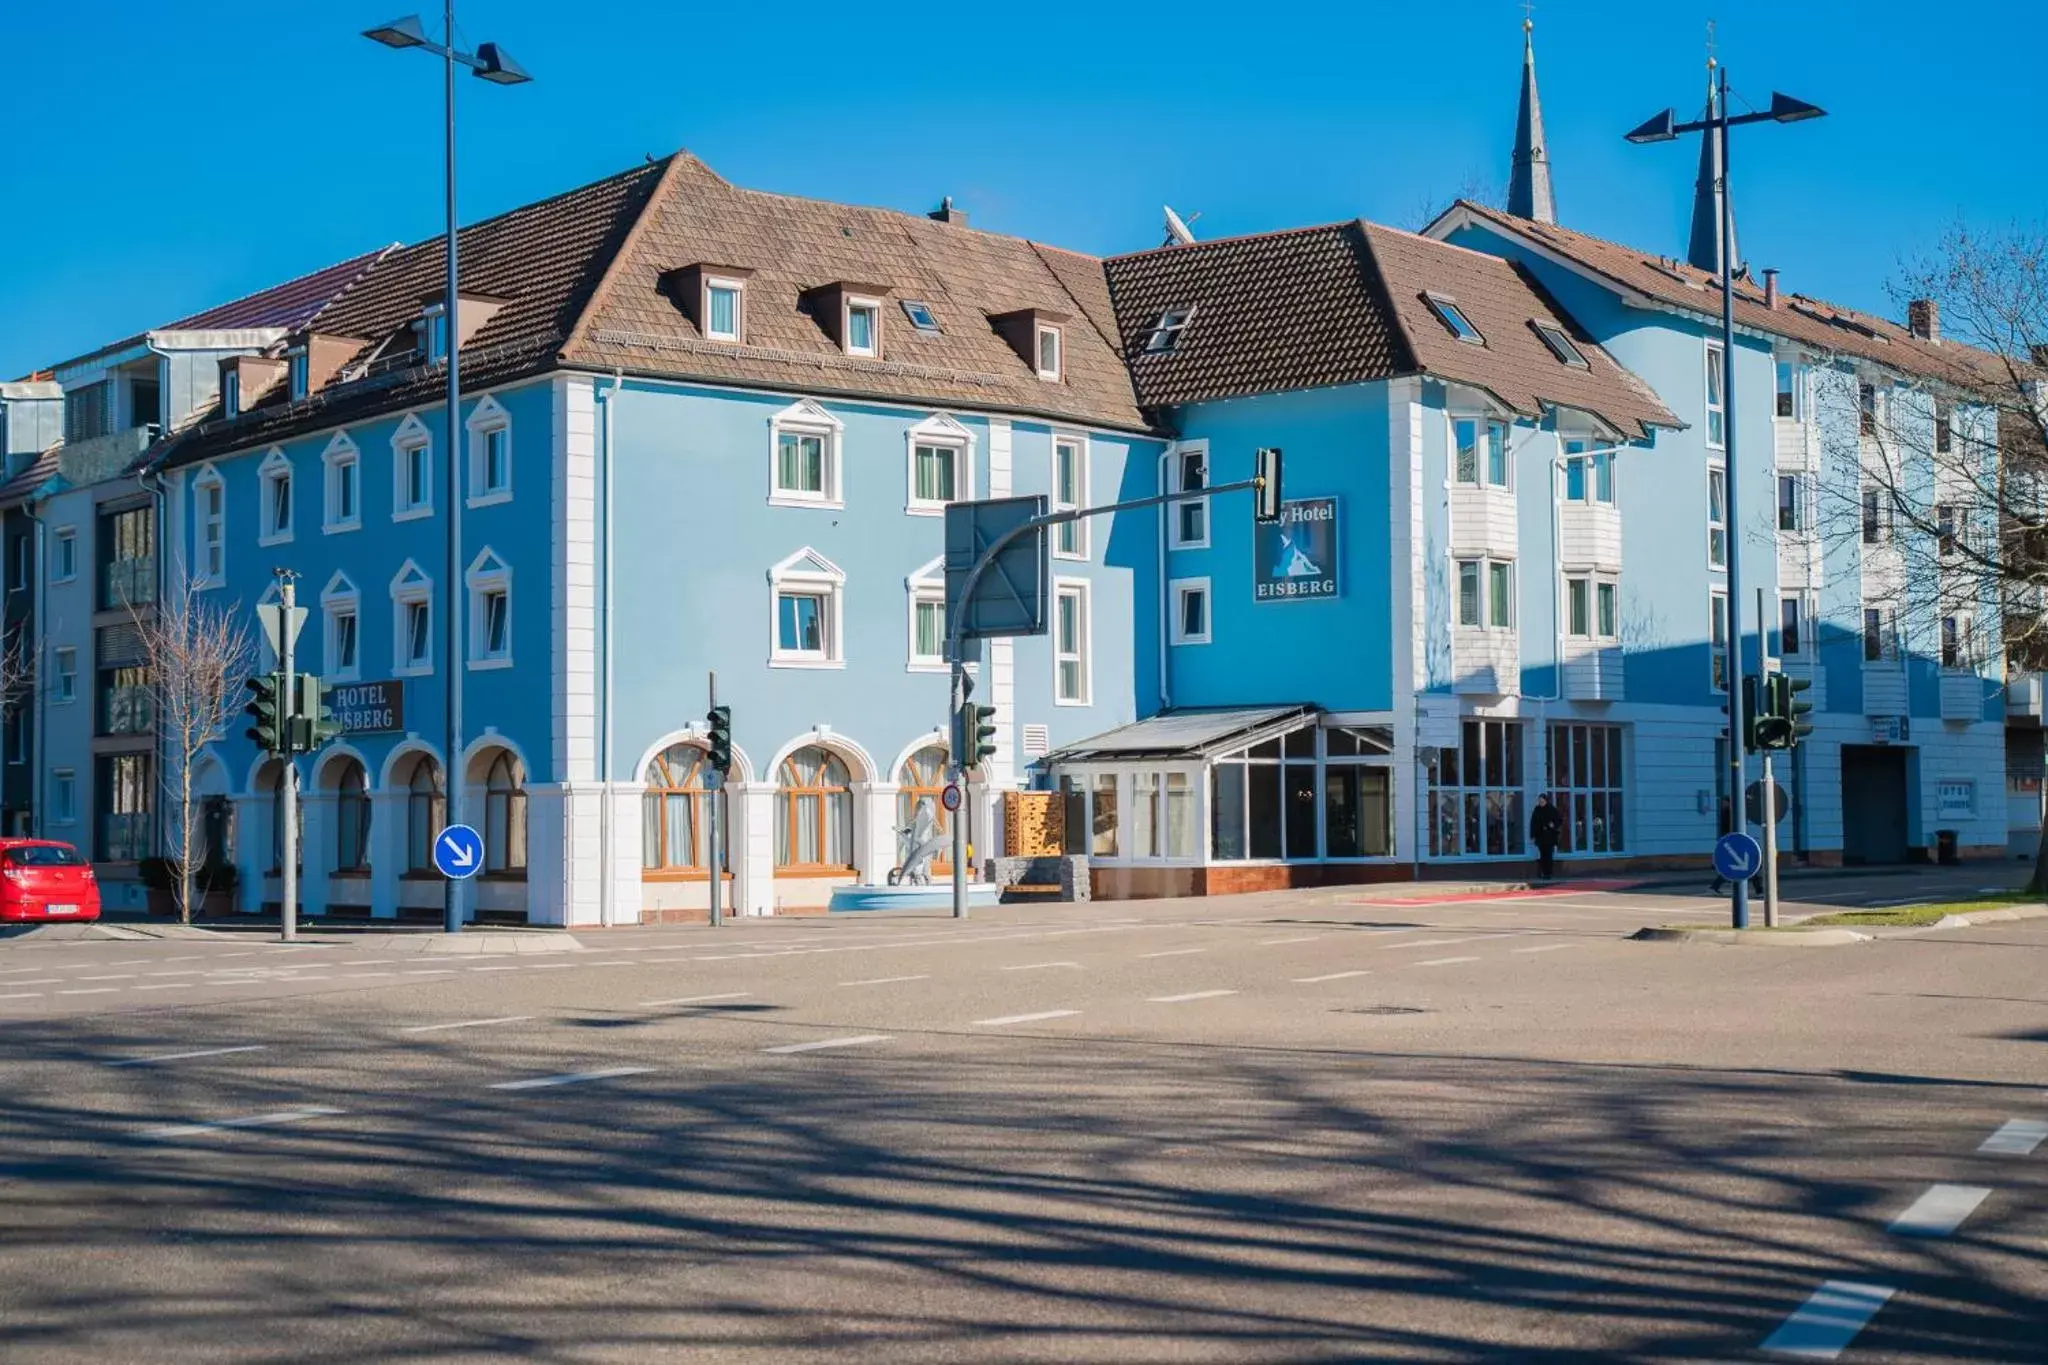 Property Building in Eisberg Hotel City